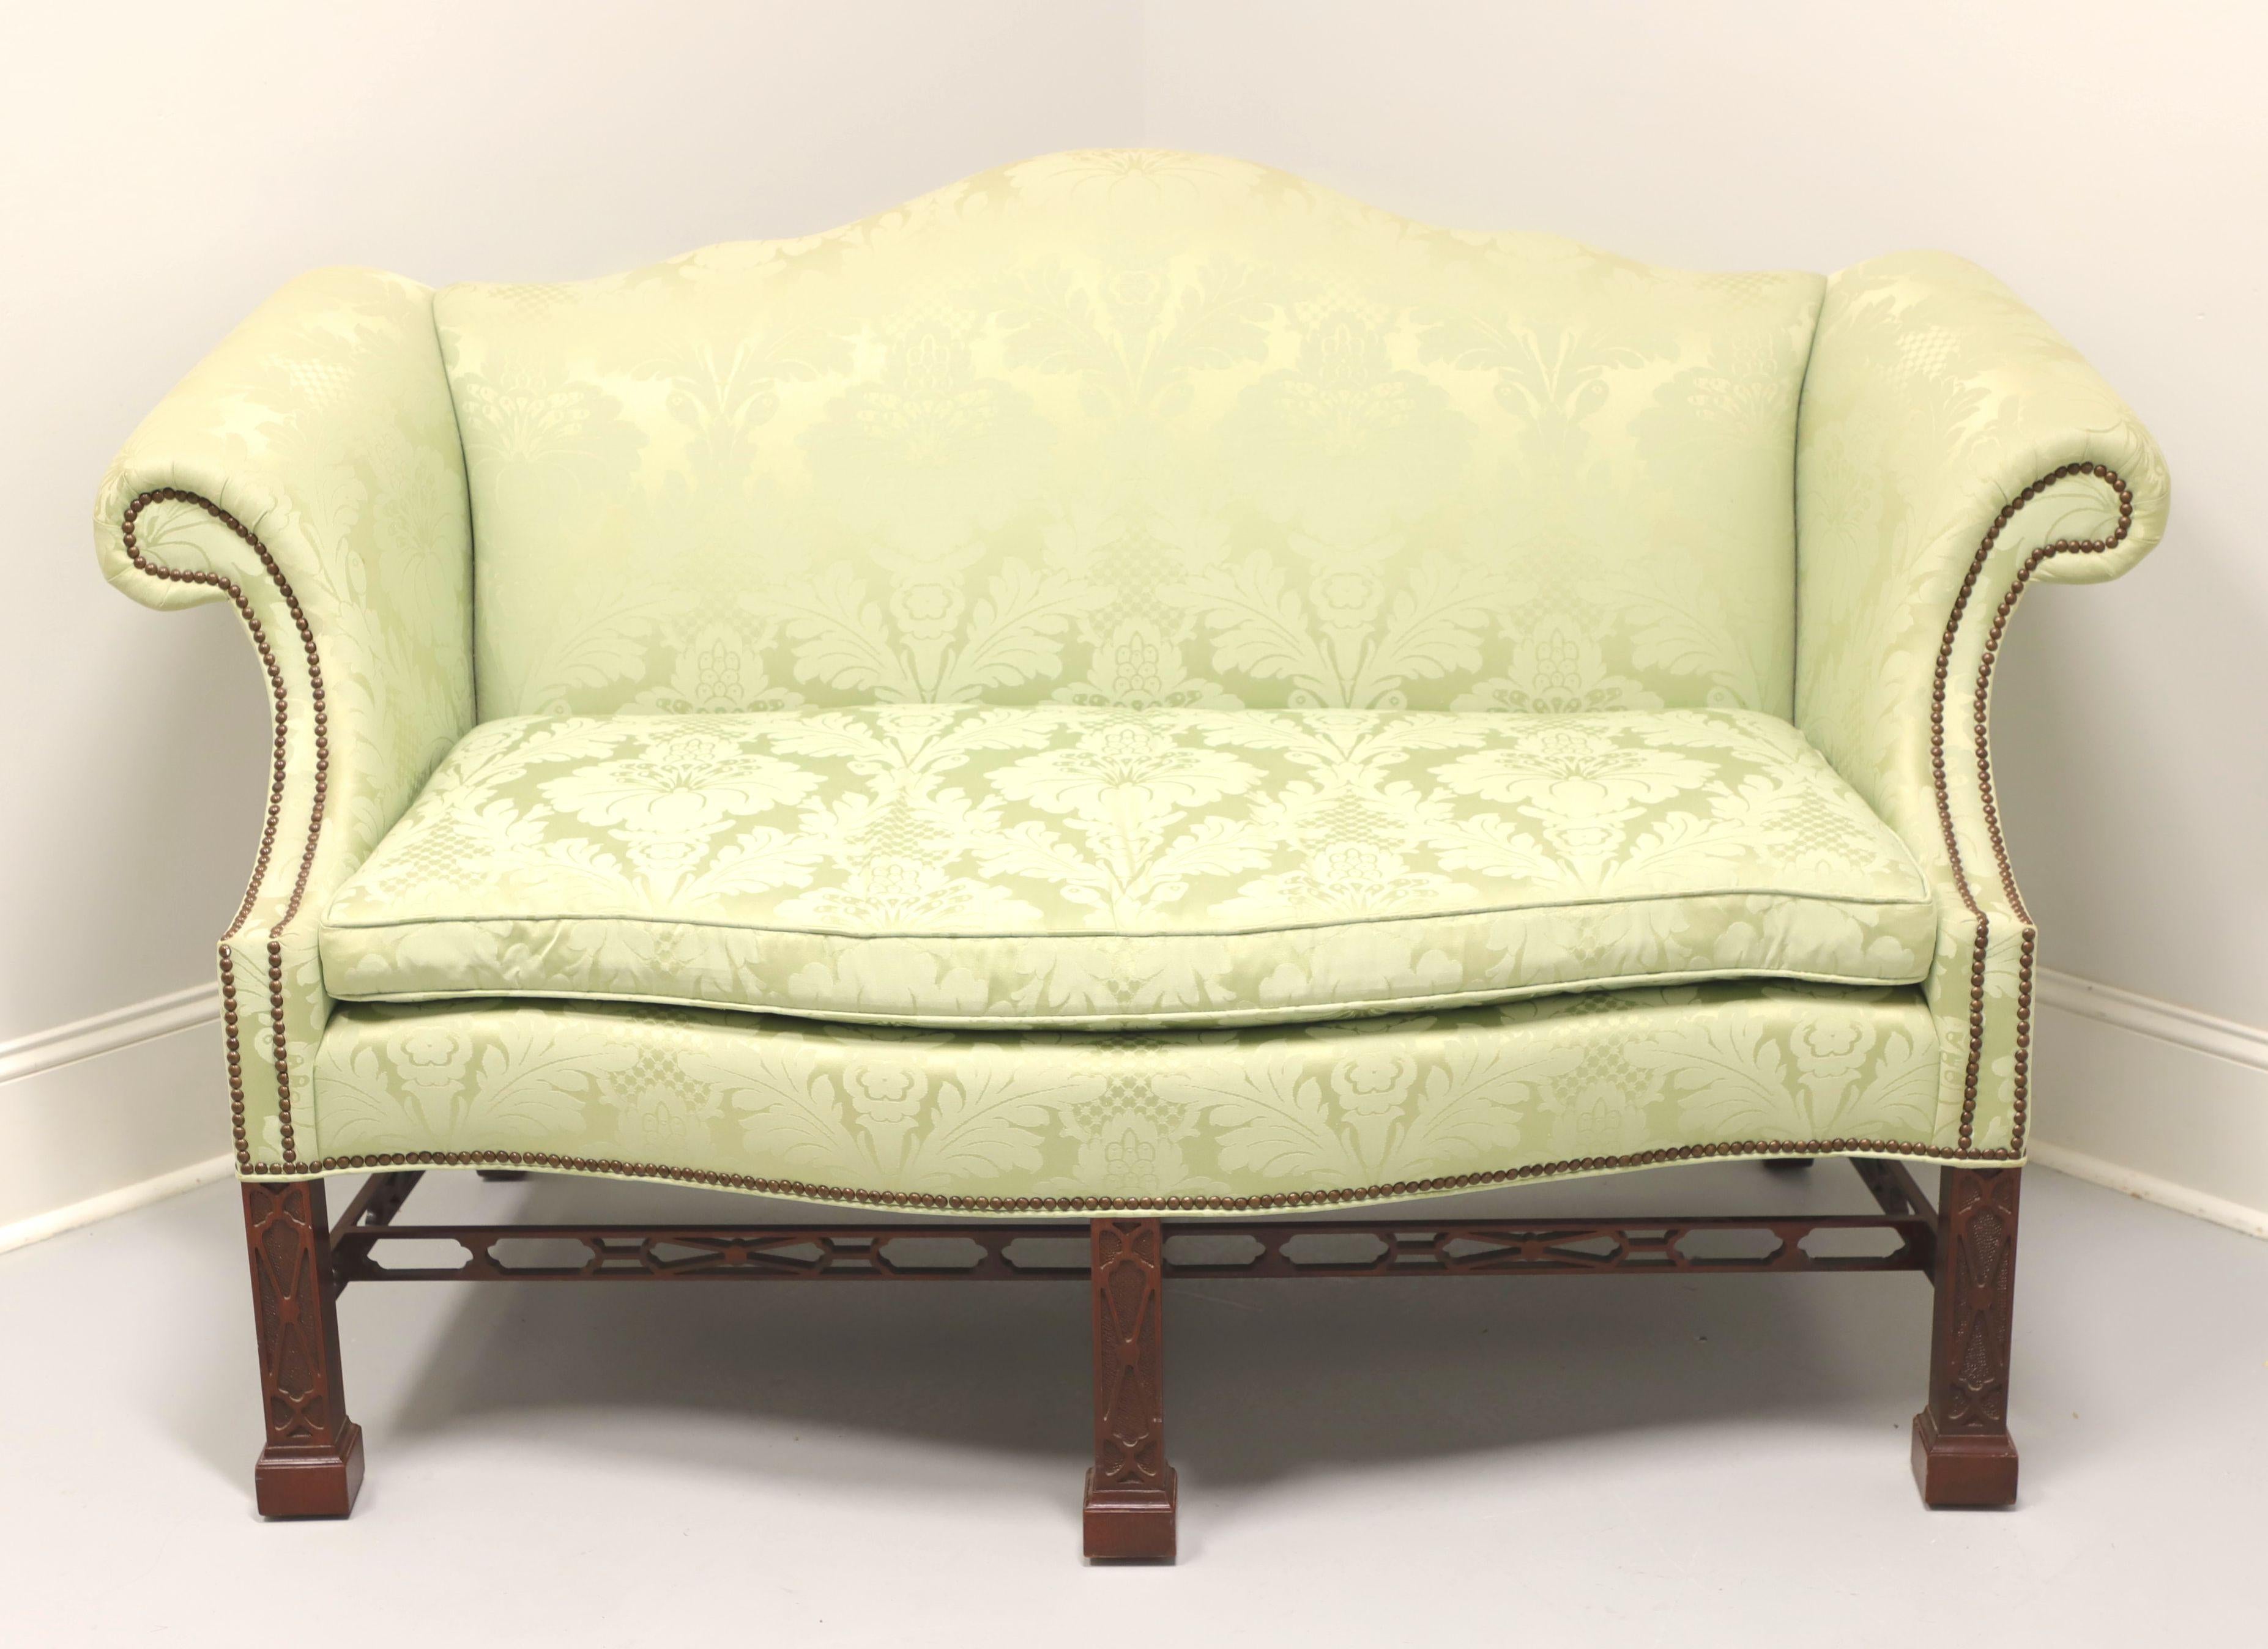 A Chippendale style camel back settee by Baker Furniture, from their Historic Charleston Reproductions Collection. Mahogany frame, camel back, rolled arms, brass nail head trim, single reversible seat cushion, fretwork stretchers, three saber back